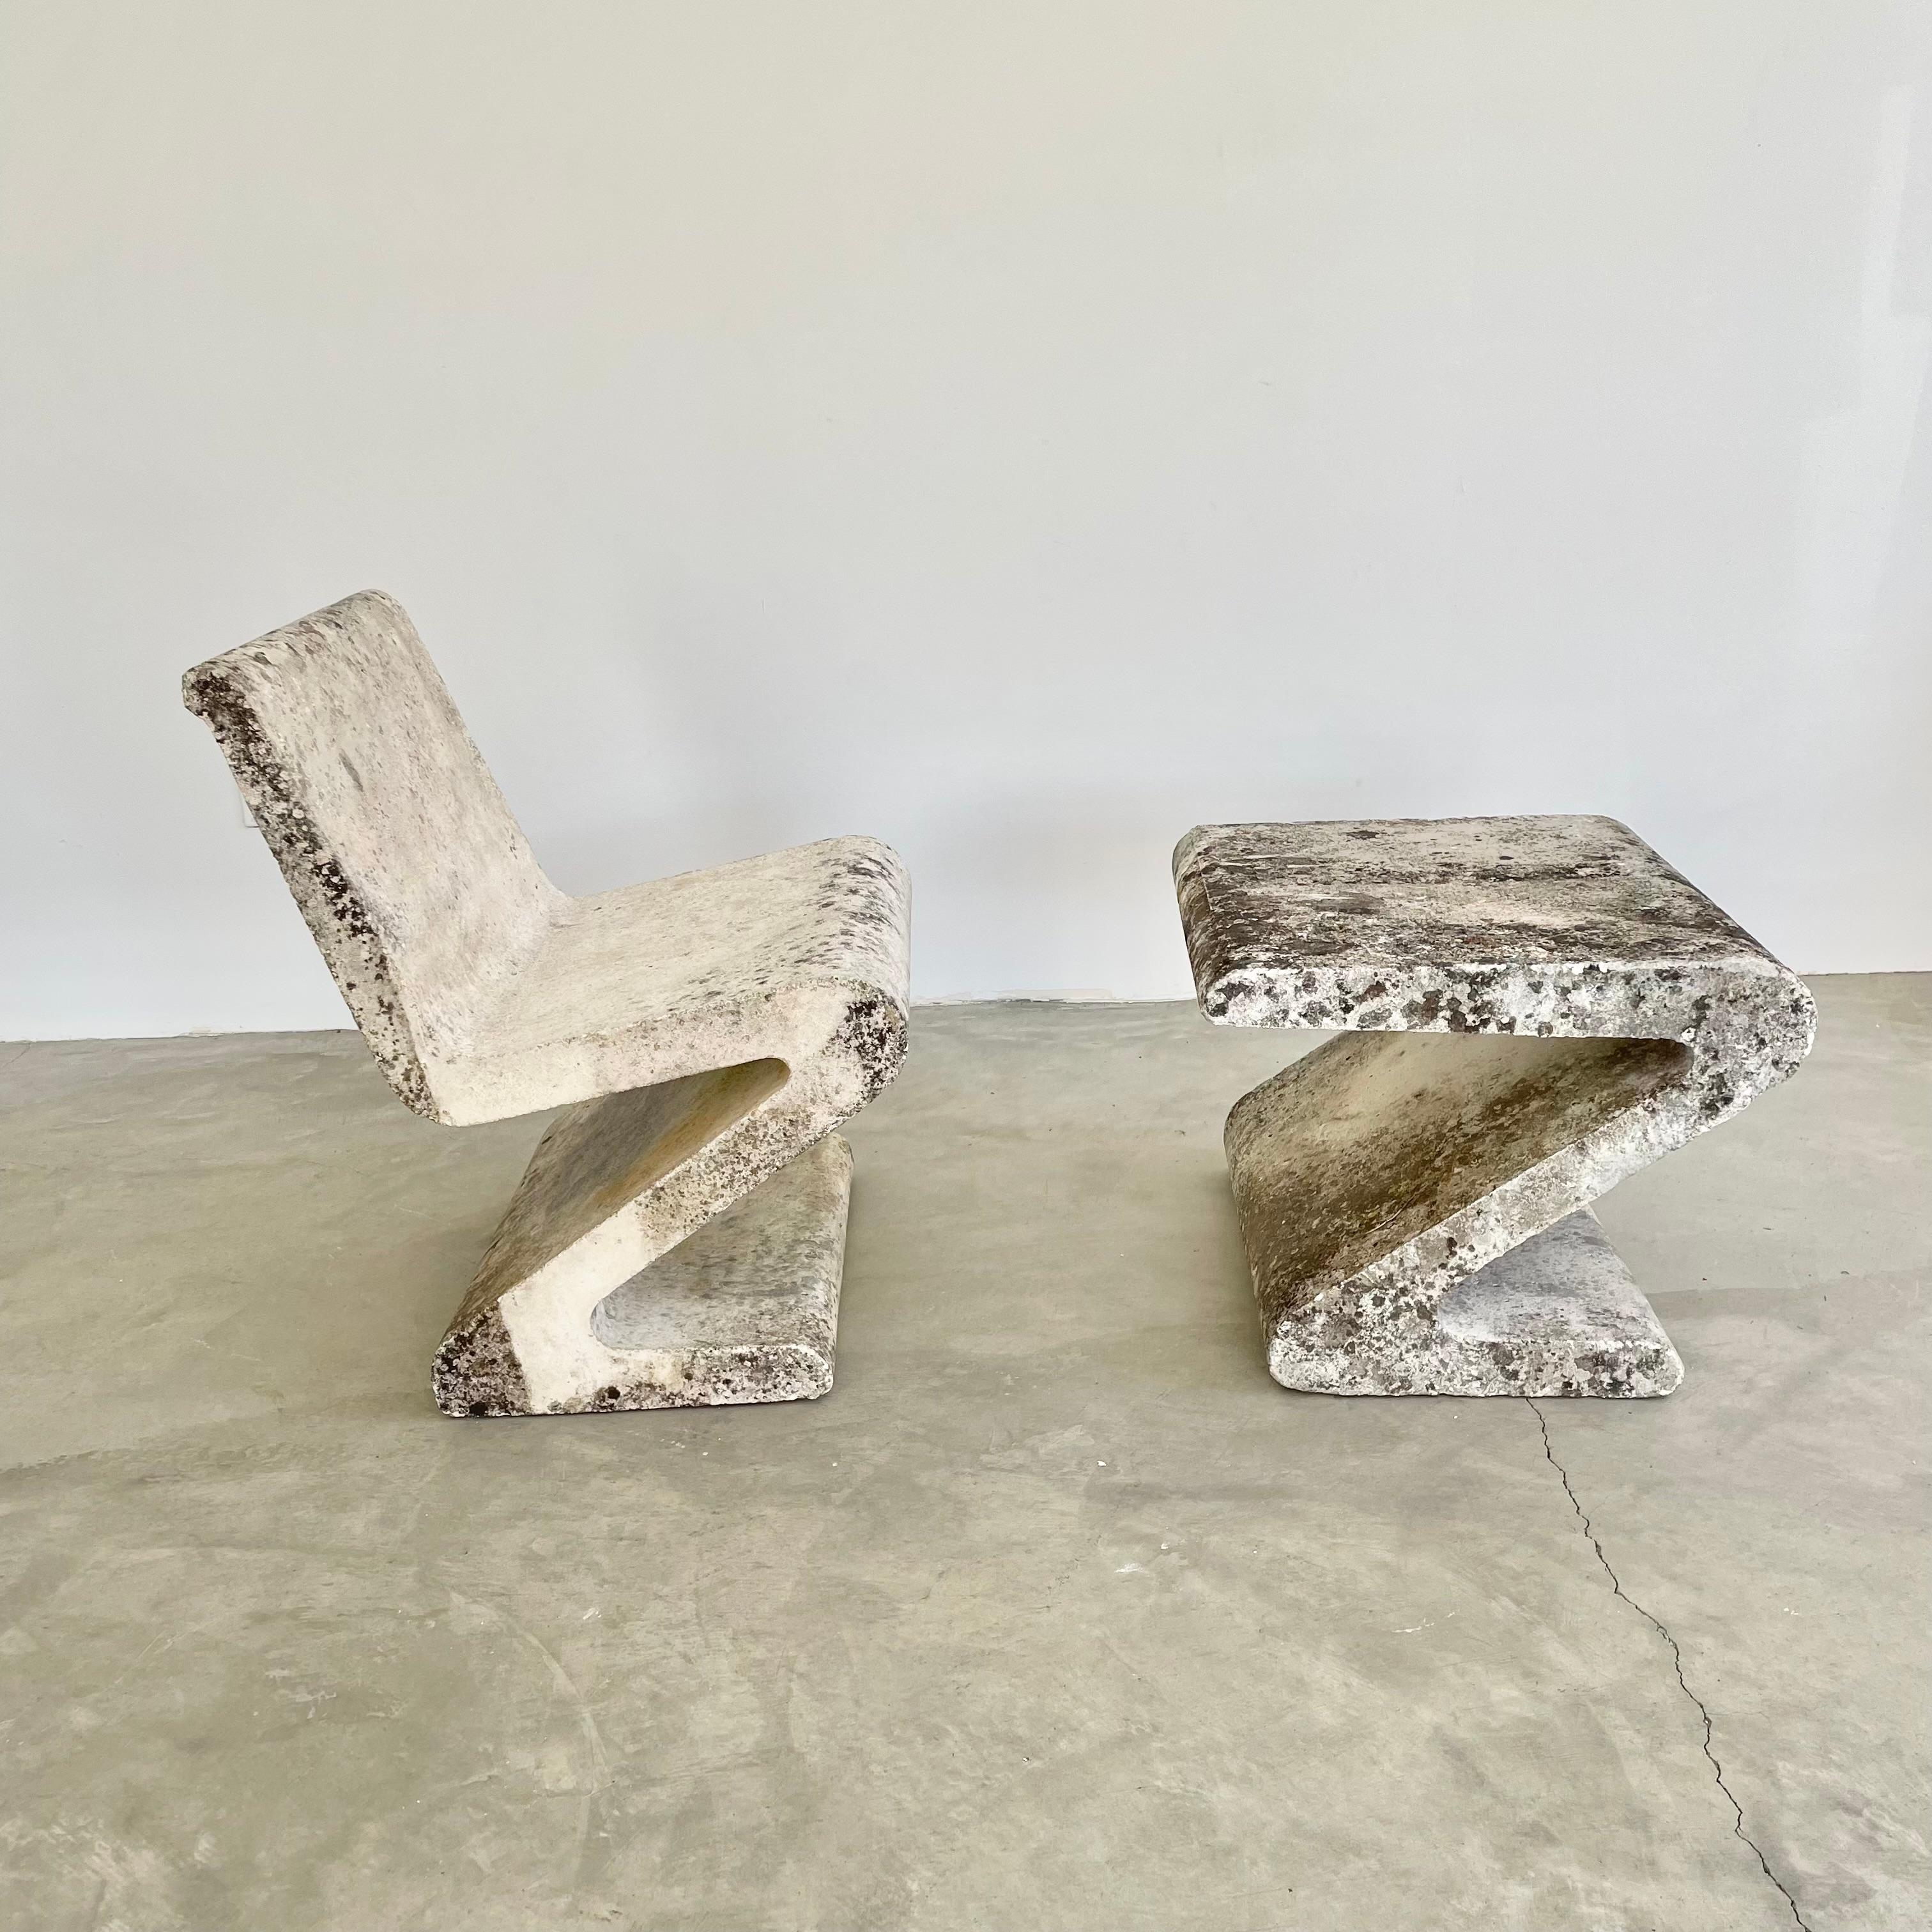 Substantial concrete zig zag chair with a matching side table. Stunning presence and design. Industrial steel rebar runs inside the concrete reinforcing the chair and table giving them extra strength. Reminiscent of the Rietveld ‚Zig Zag chairs,